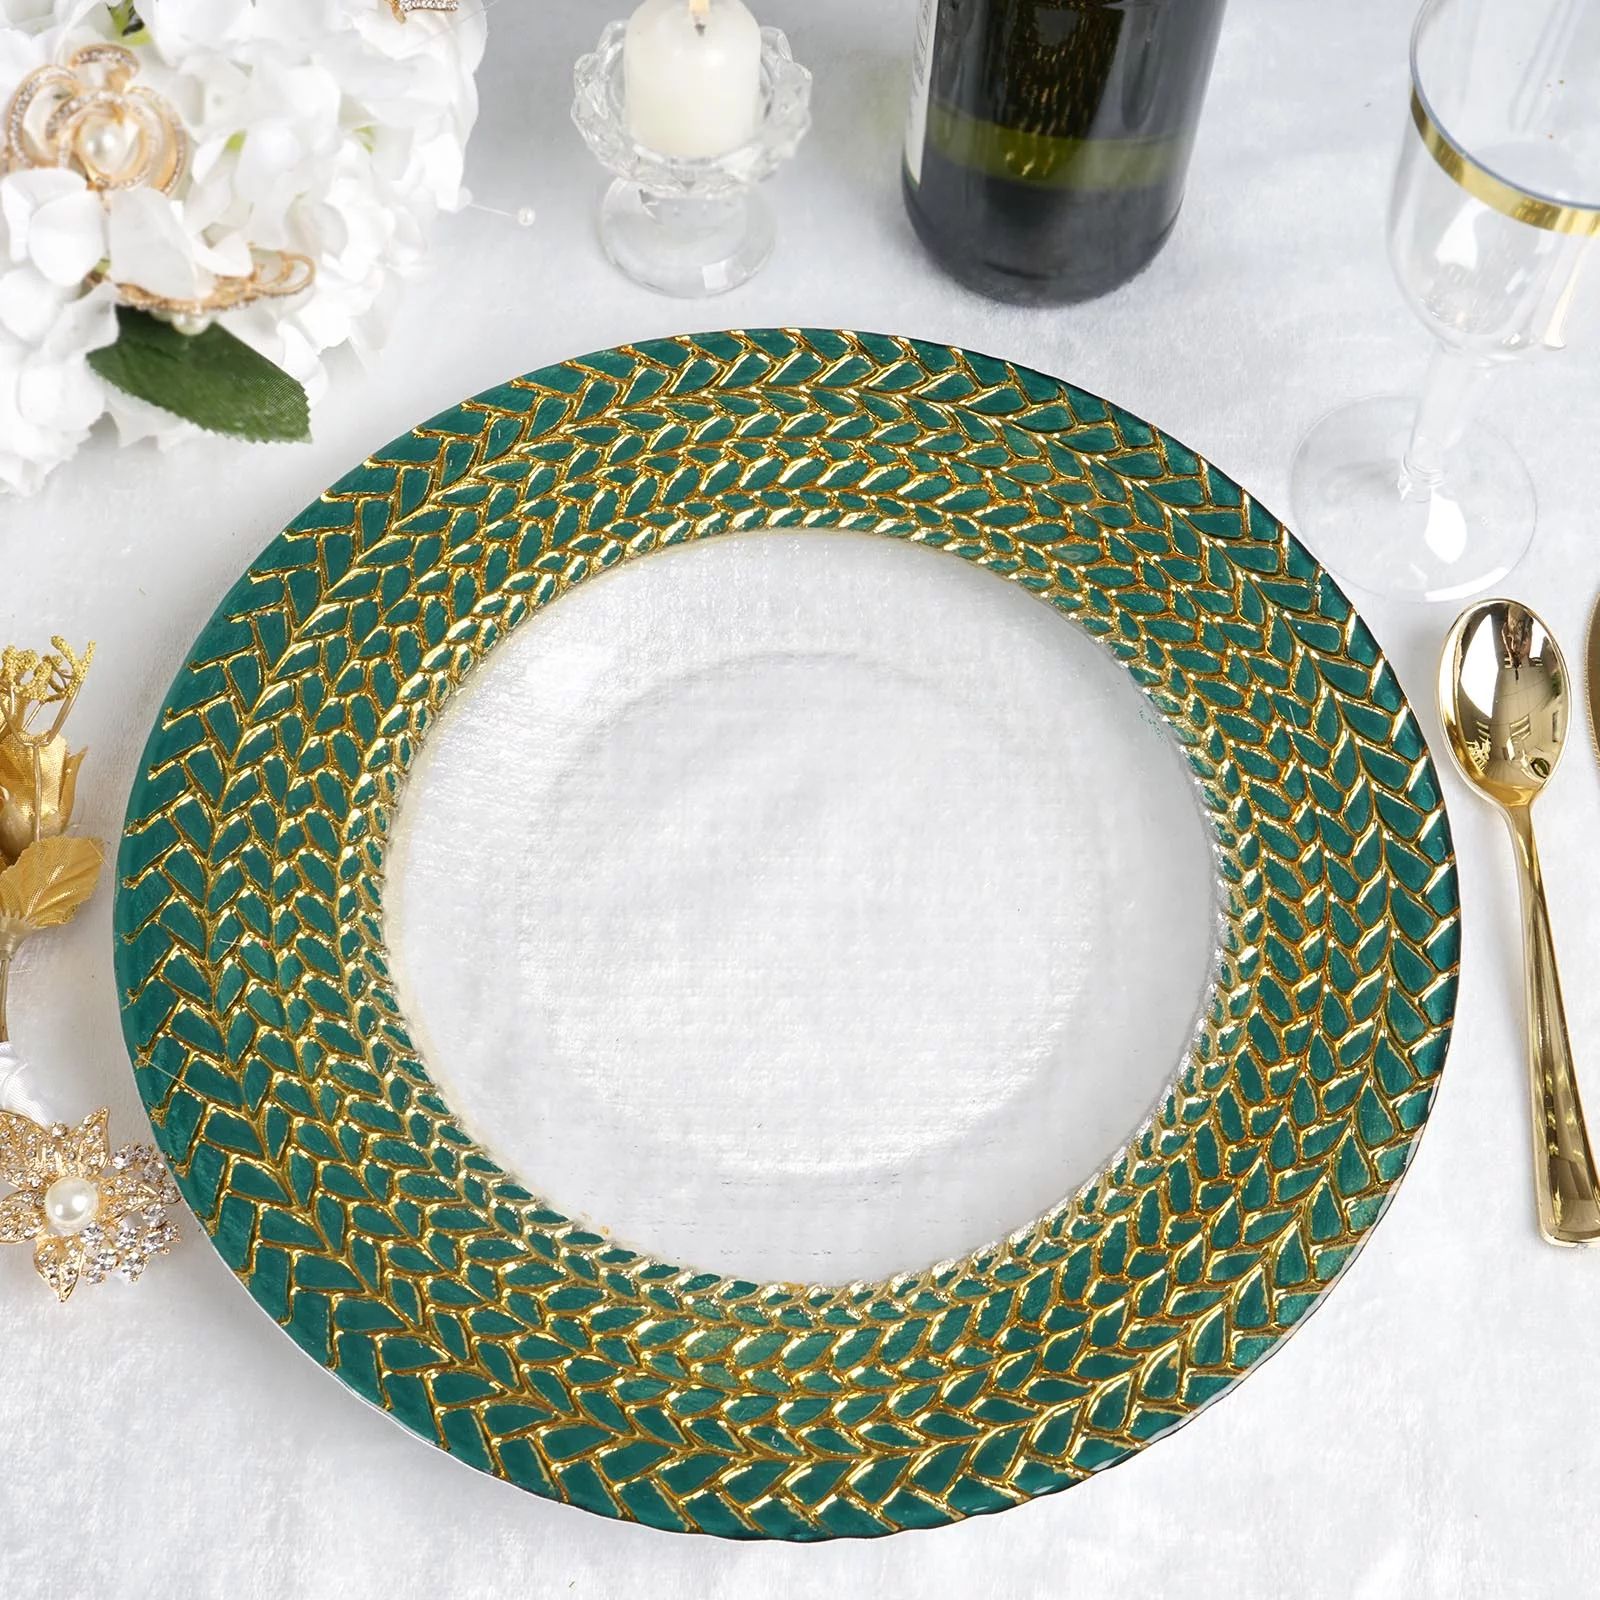 Efavormart 8 Pack 13" Glass Charger Plates Reusable Charger Plates with Teal Green and Gold Braid... | Walmart (US)